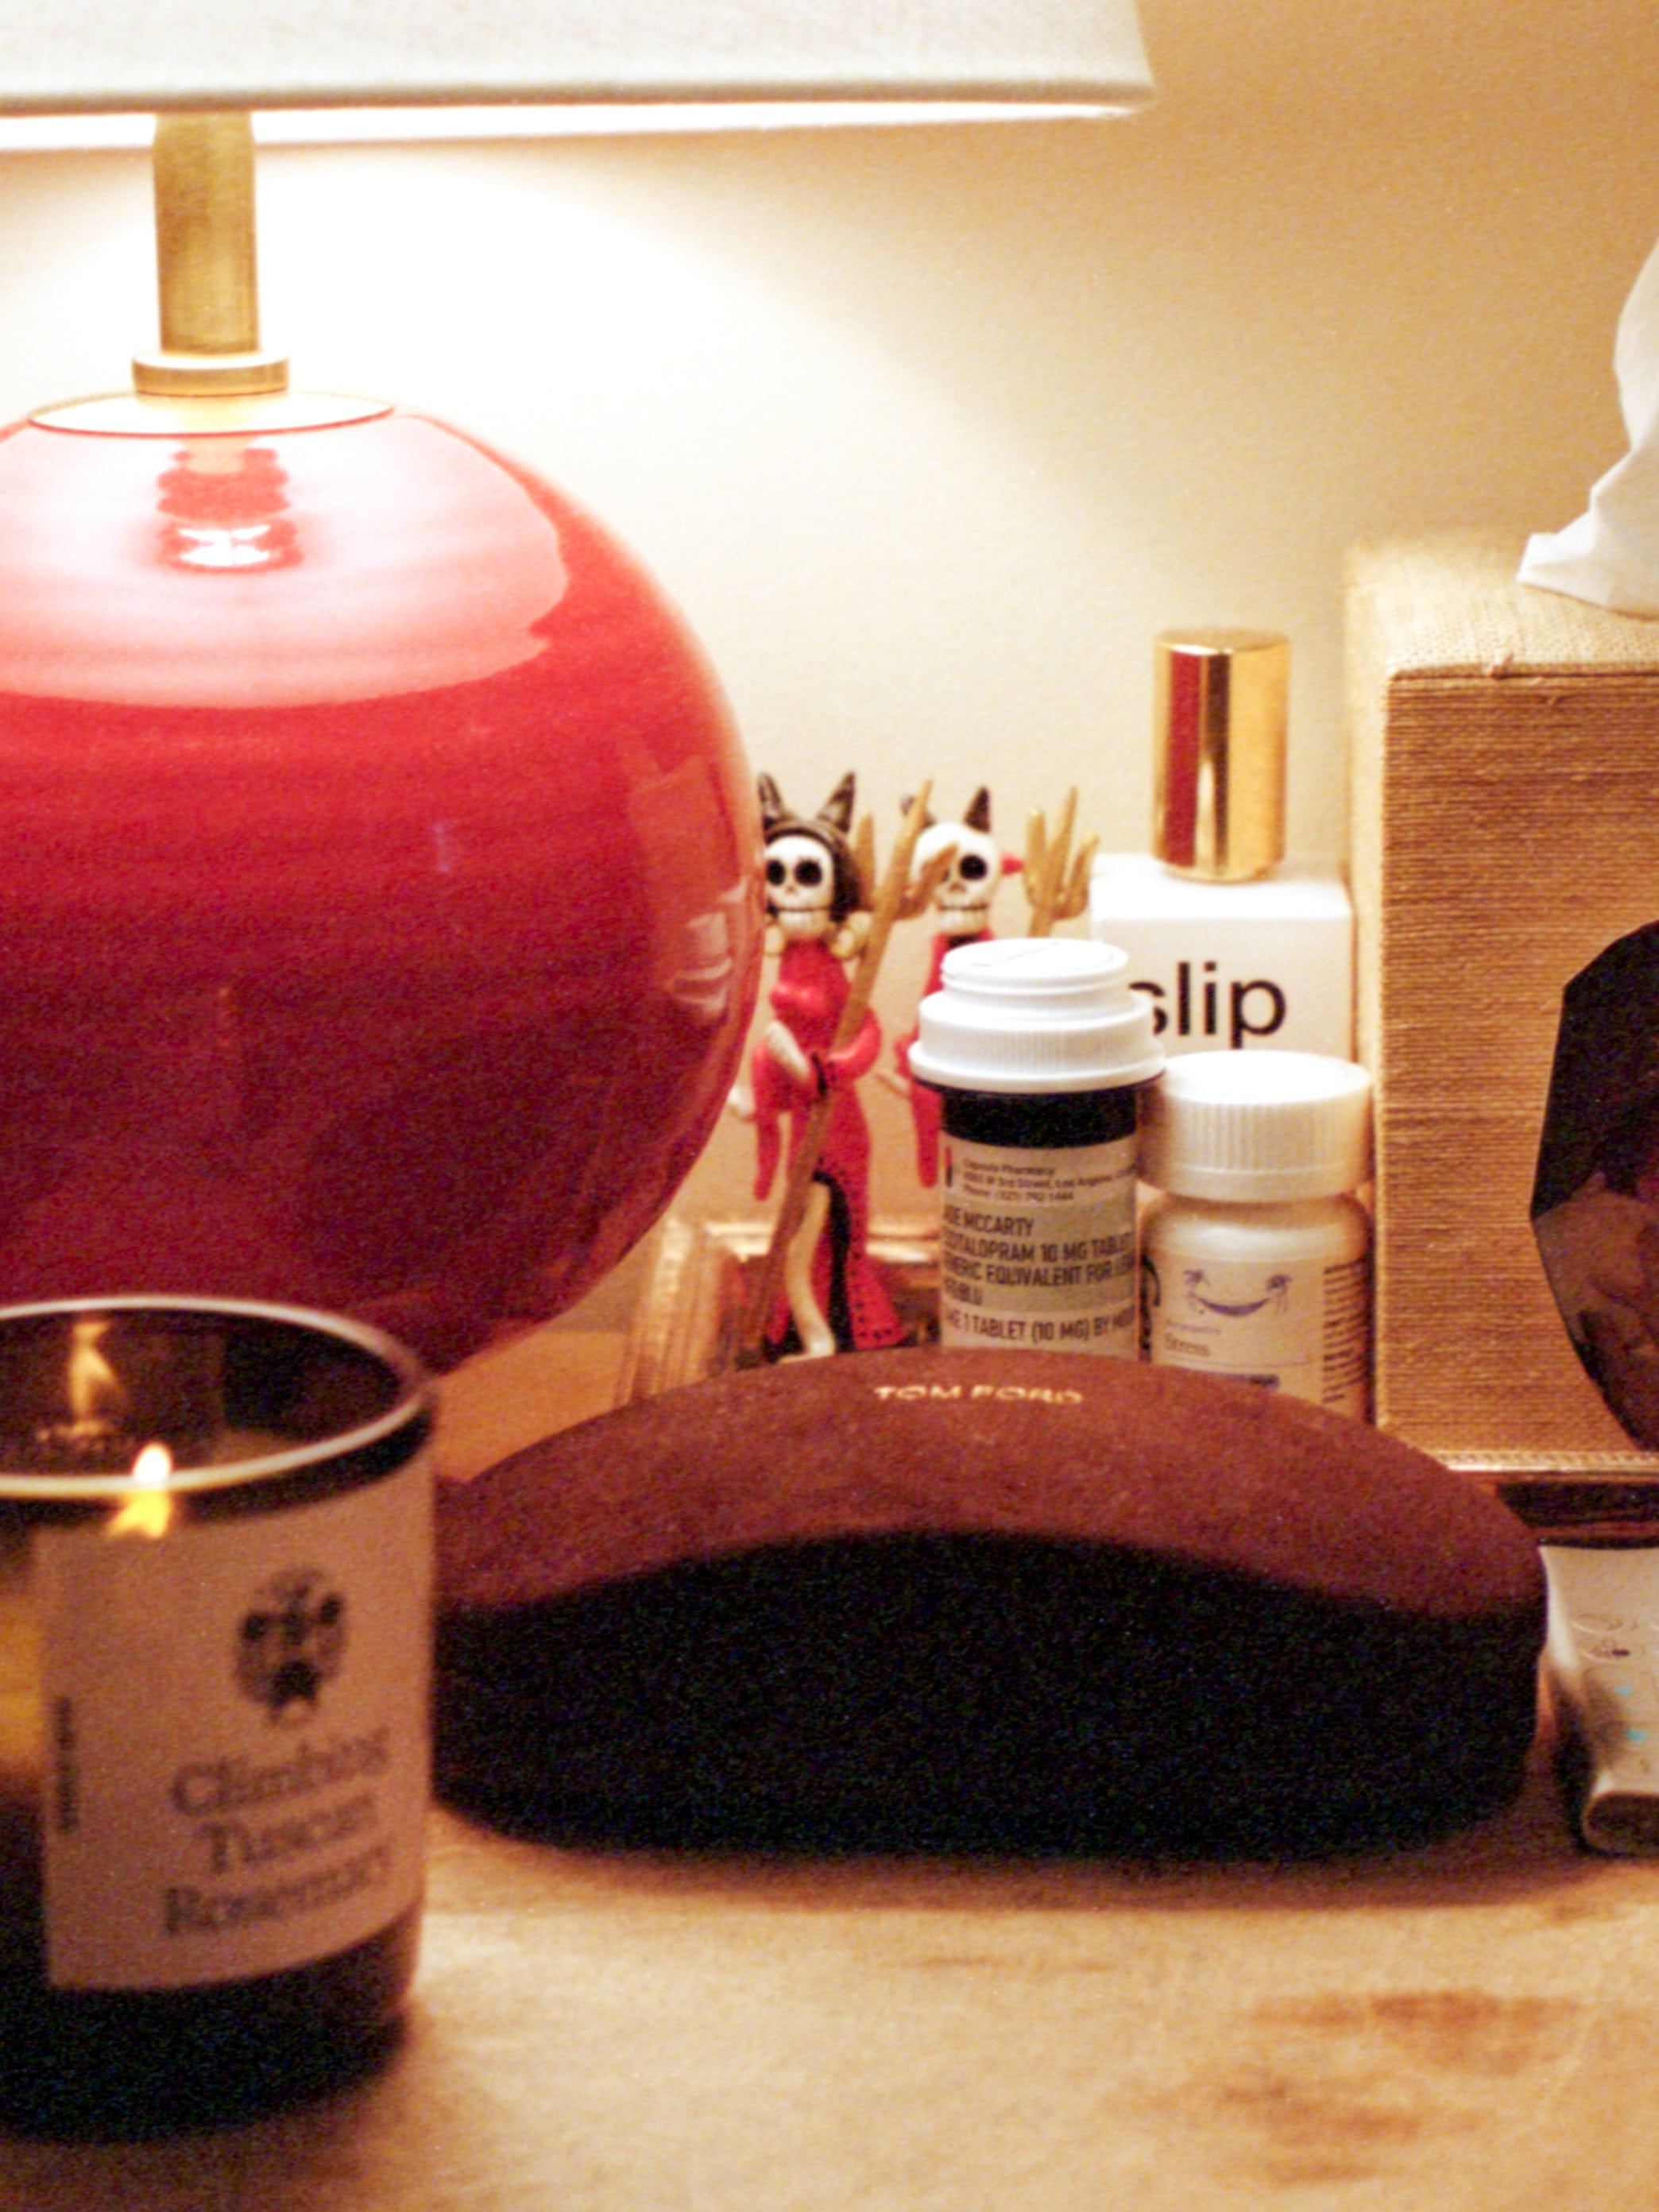 Jade Iovine's bedside table with a lamp, medicine, a candle and candle